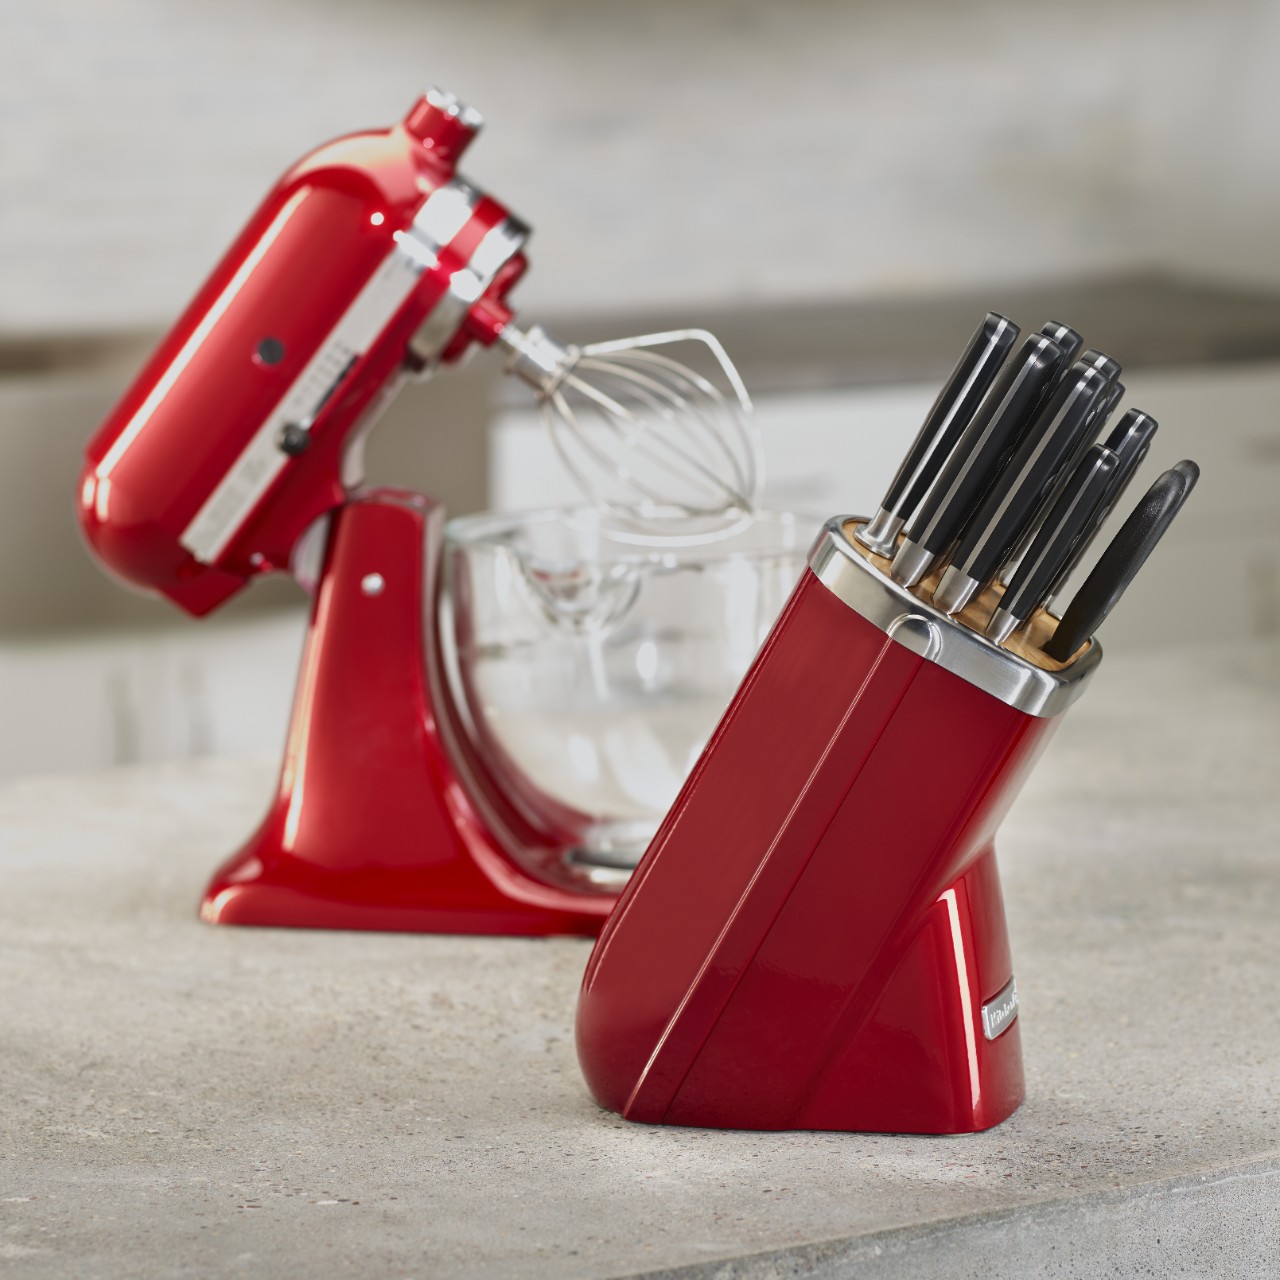 https://www.kitchenaid.in/content/kitchenaid/en_in/kitchenware/cutlery/_jcr_content/root/main/responsivegrid/responsivegrid_copy/responsivegrid_17308/container/wrapperParsys/image_copy.coreimg.jpeg/1575665340924/additional-p150129-41.jpeg